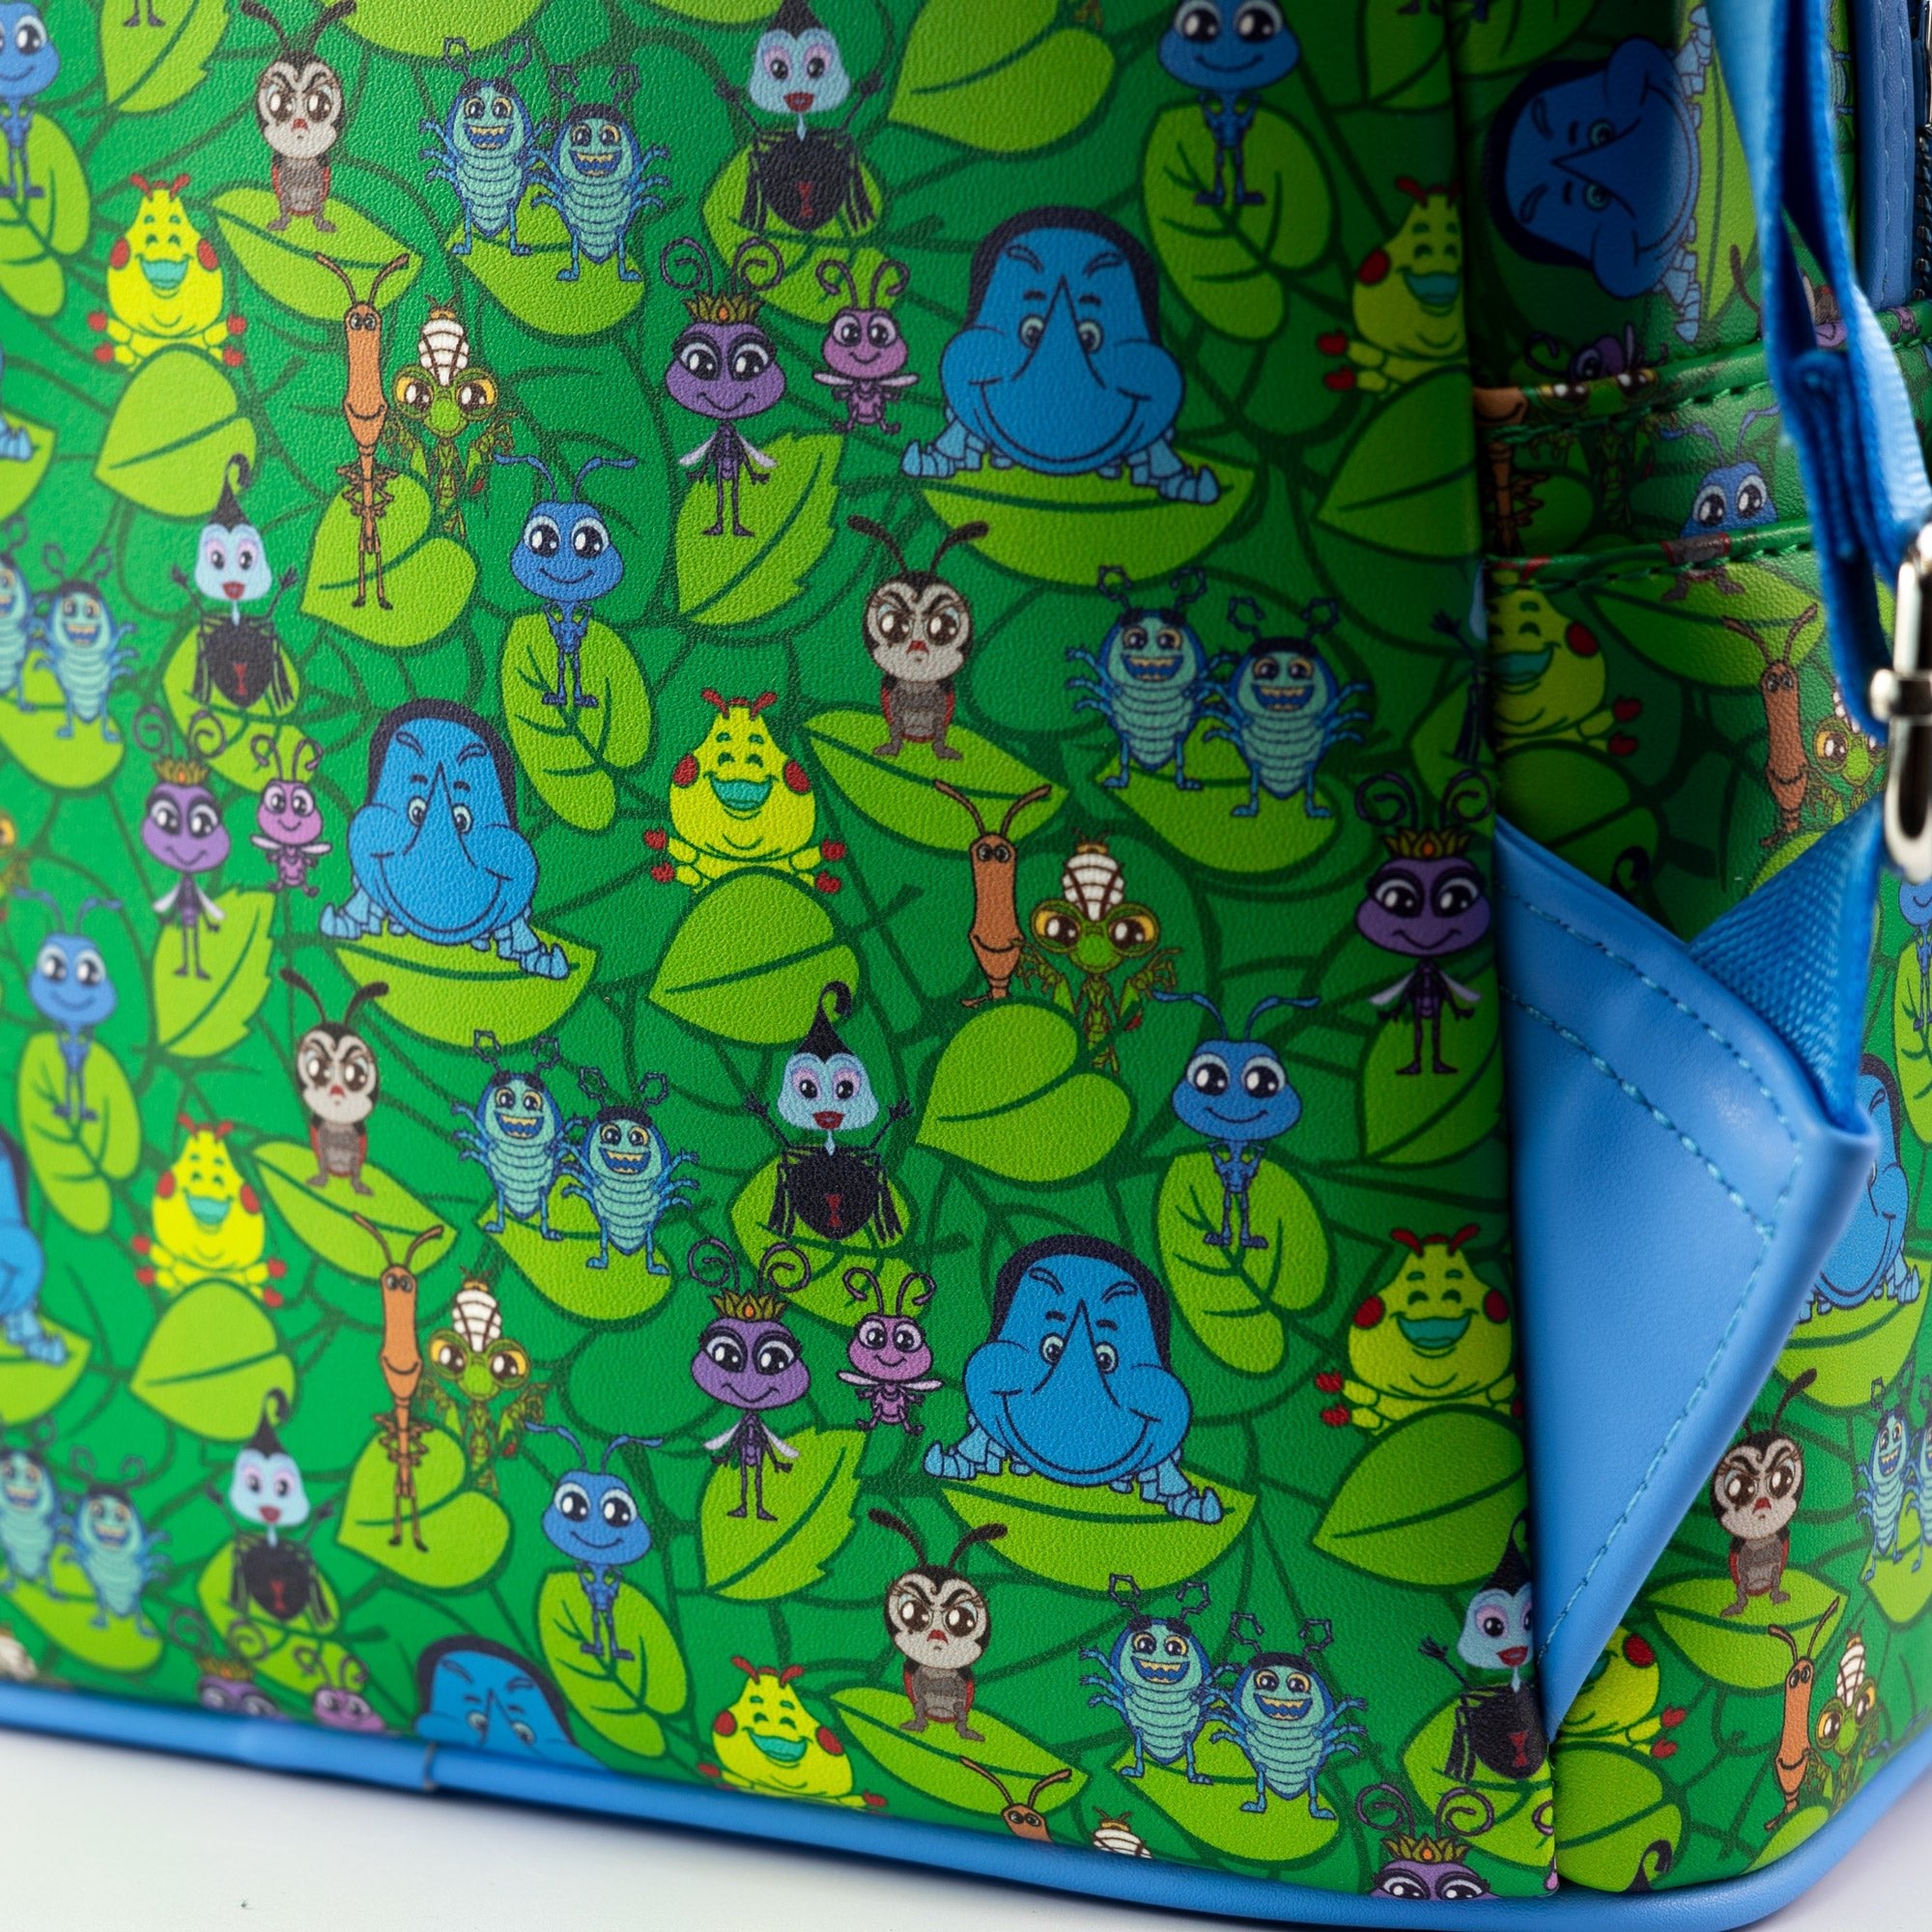 Loungefly x Disney Pixar A Bugs Life All Over Print Mini Backpack - GeekCore